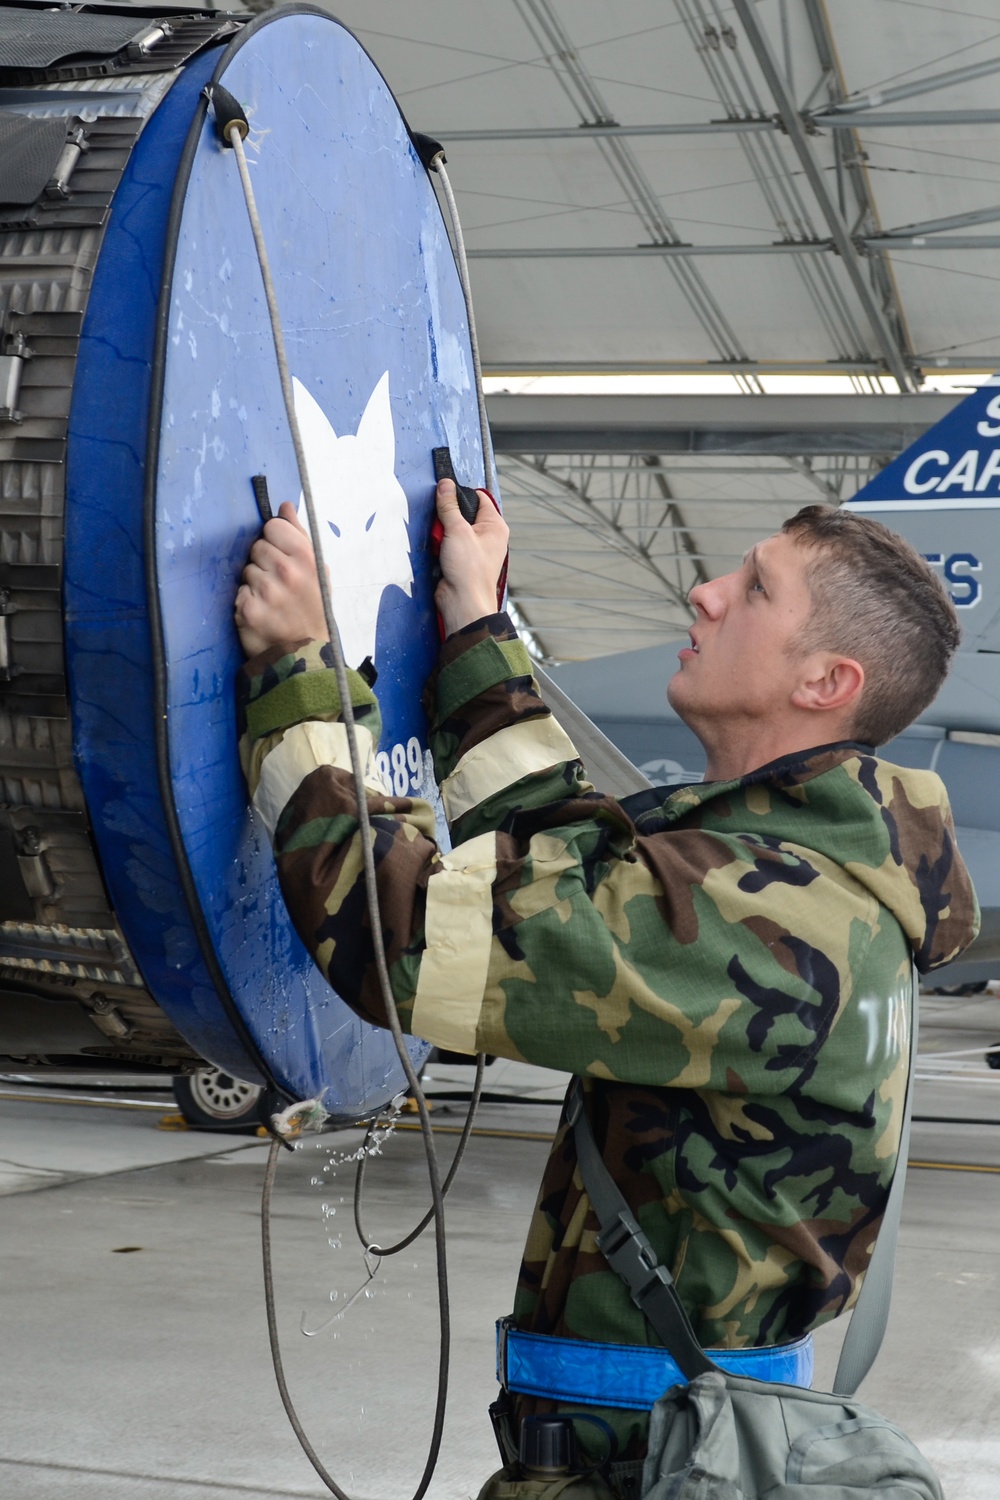 169th Fighter Wing readiness exercise ops